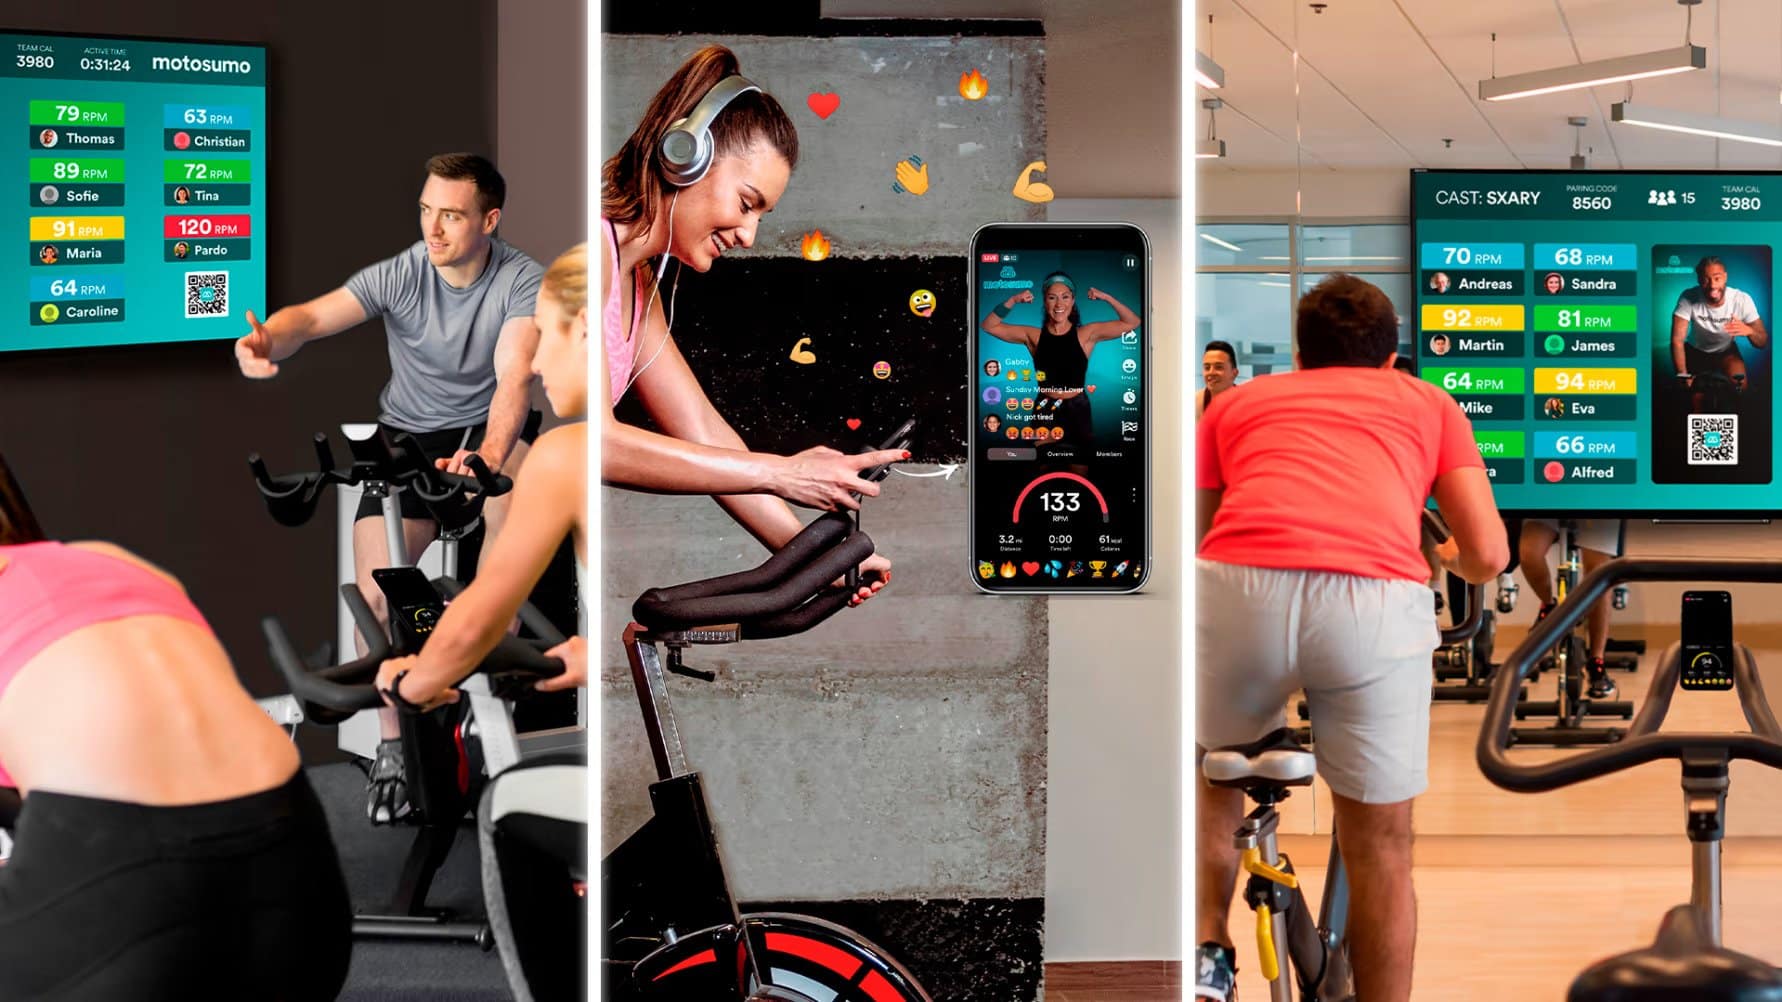 Motosumo gives gyms and their members free access to their popular indoor cycling platform